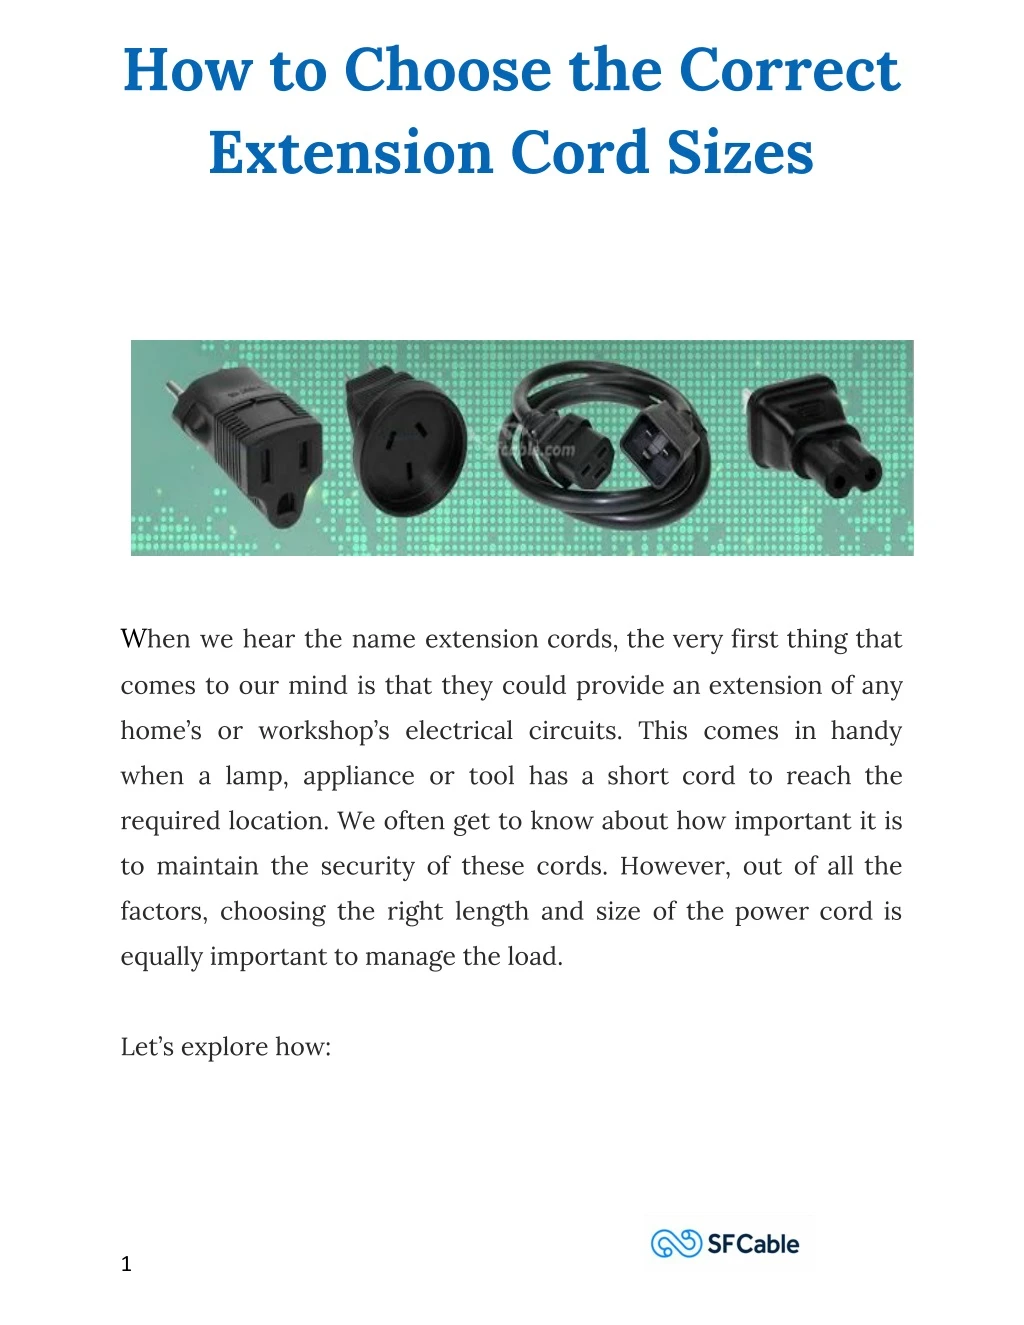 how to choose the correct extension cord sizes